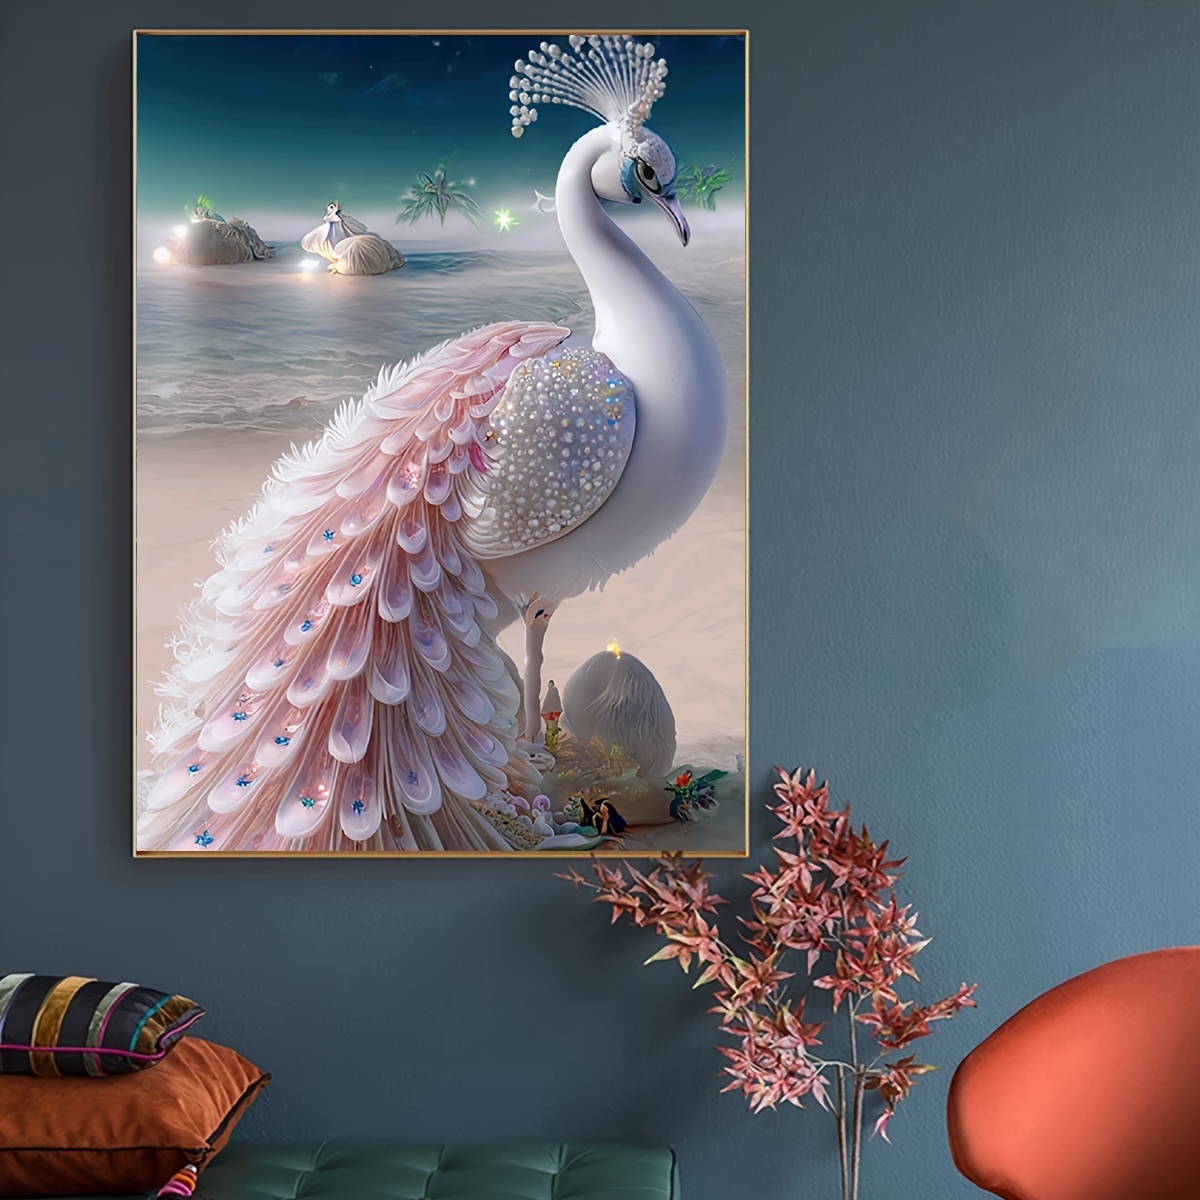 Mimik Peacock Diamond Painting,Paint by Diamonds for Adults, Diamond Art  with Accessories & Tools,Wall Decoration Crafts,Relaxation and Home Wall